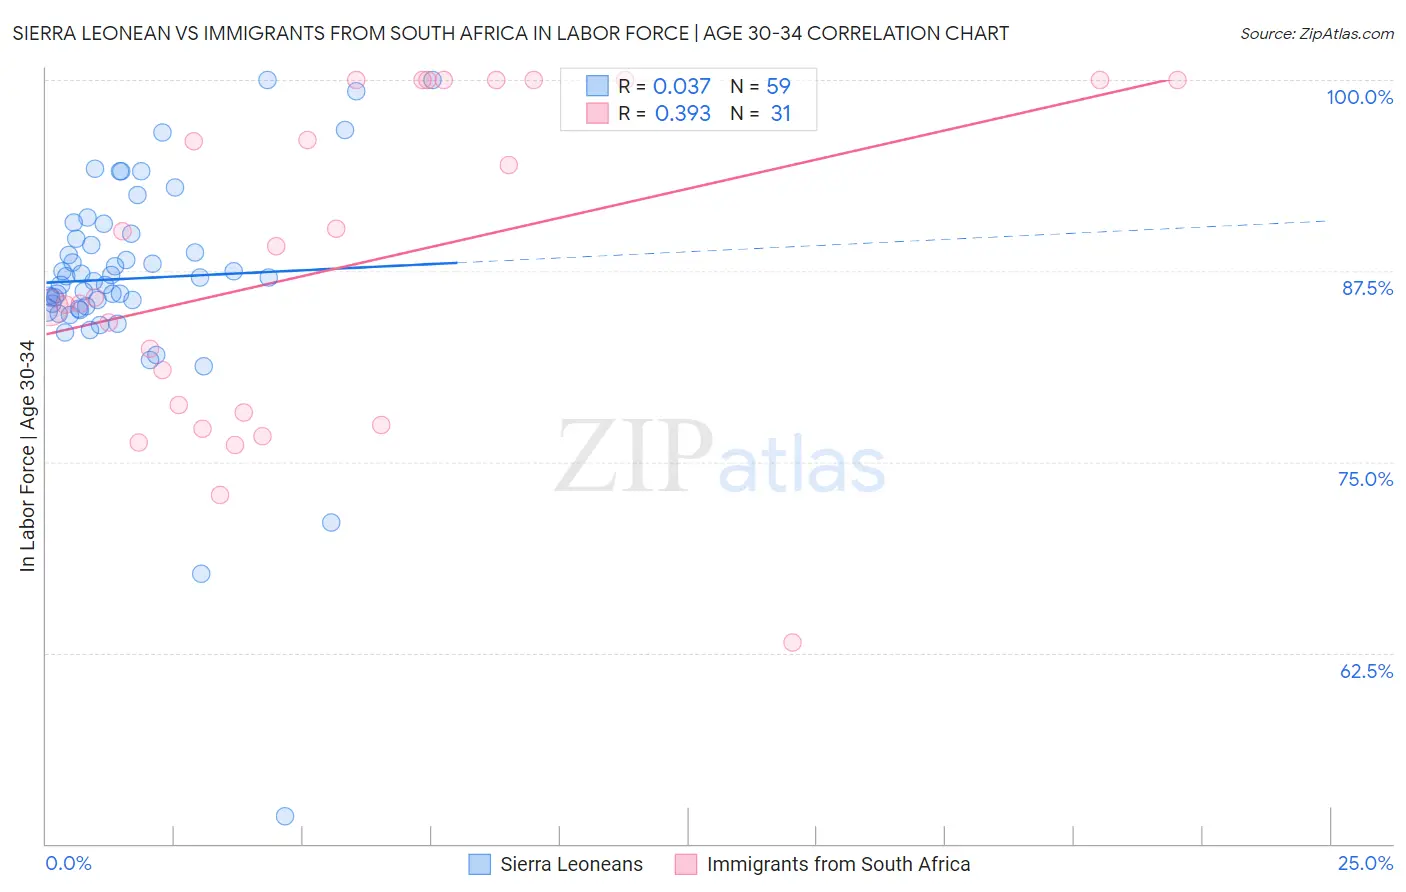 Sierra Leonean vs Immigrants from South Africa In Labor Force | Age 30-34